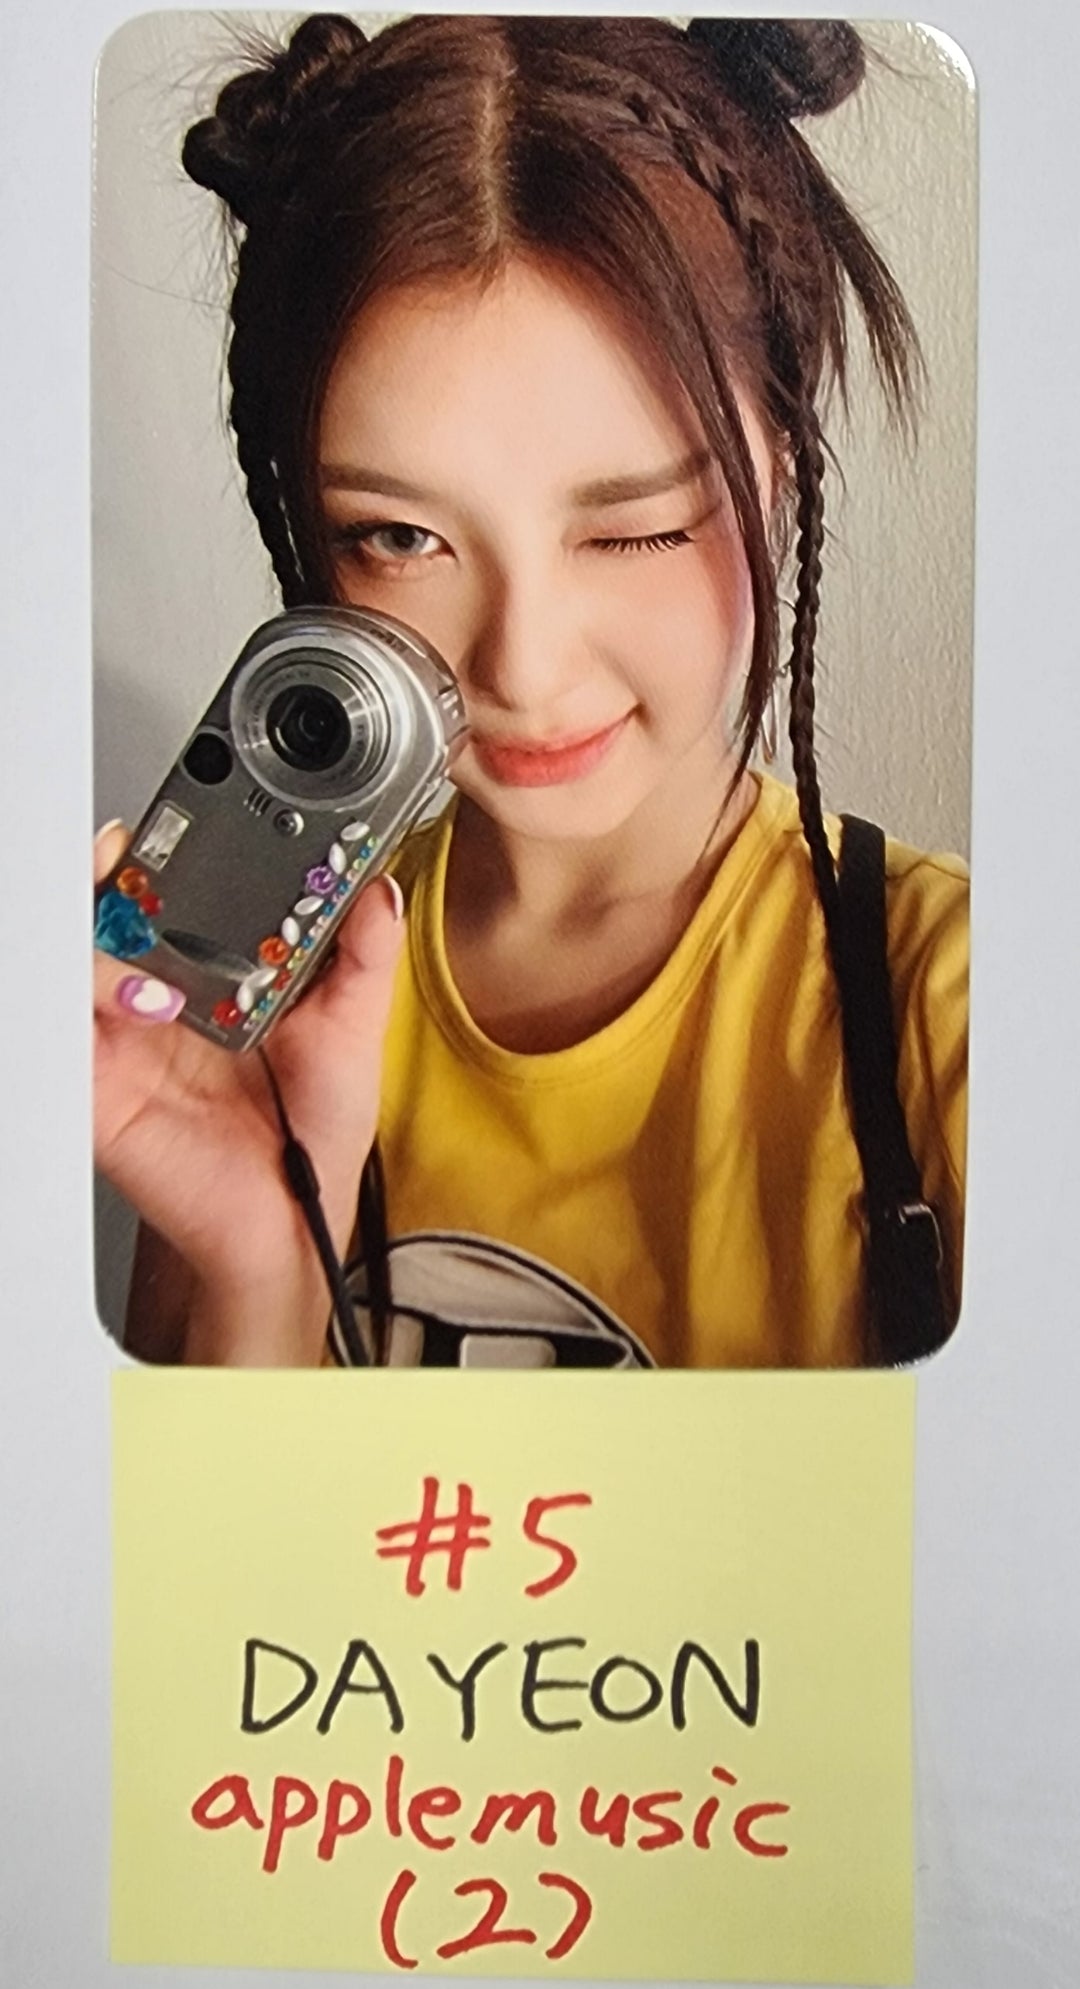 Kep1er "TROUBLESHOOTER" - Apple Music Pre-Order Benefit Photocard